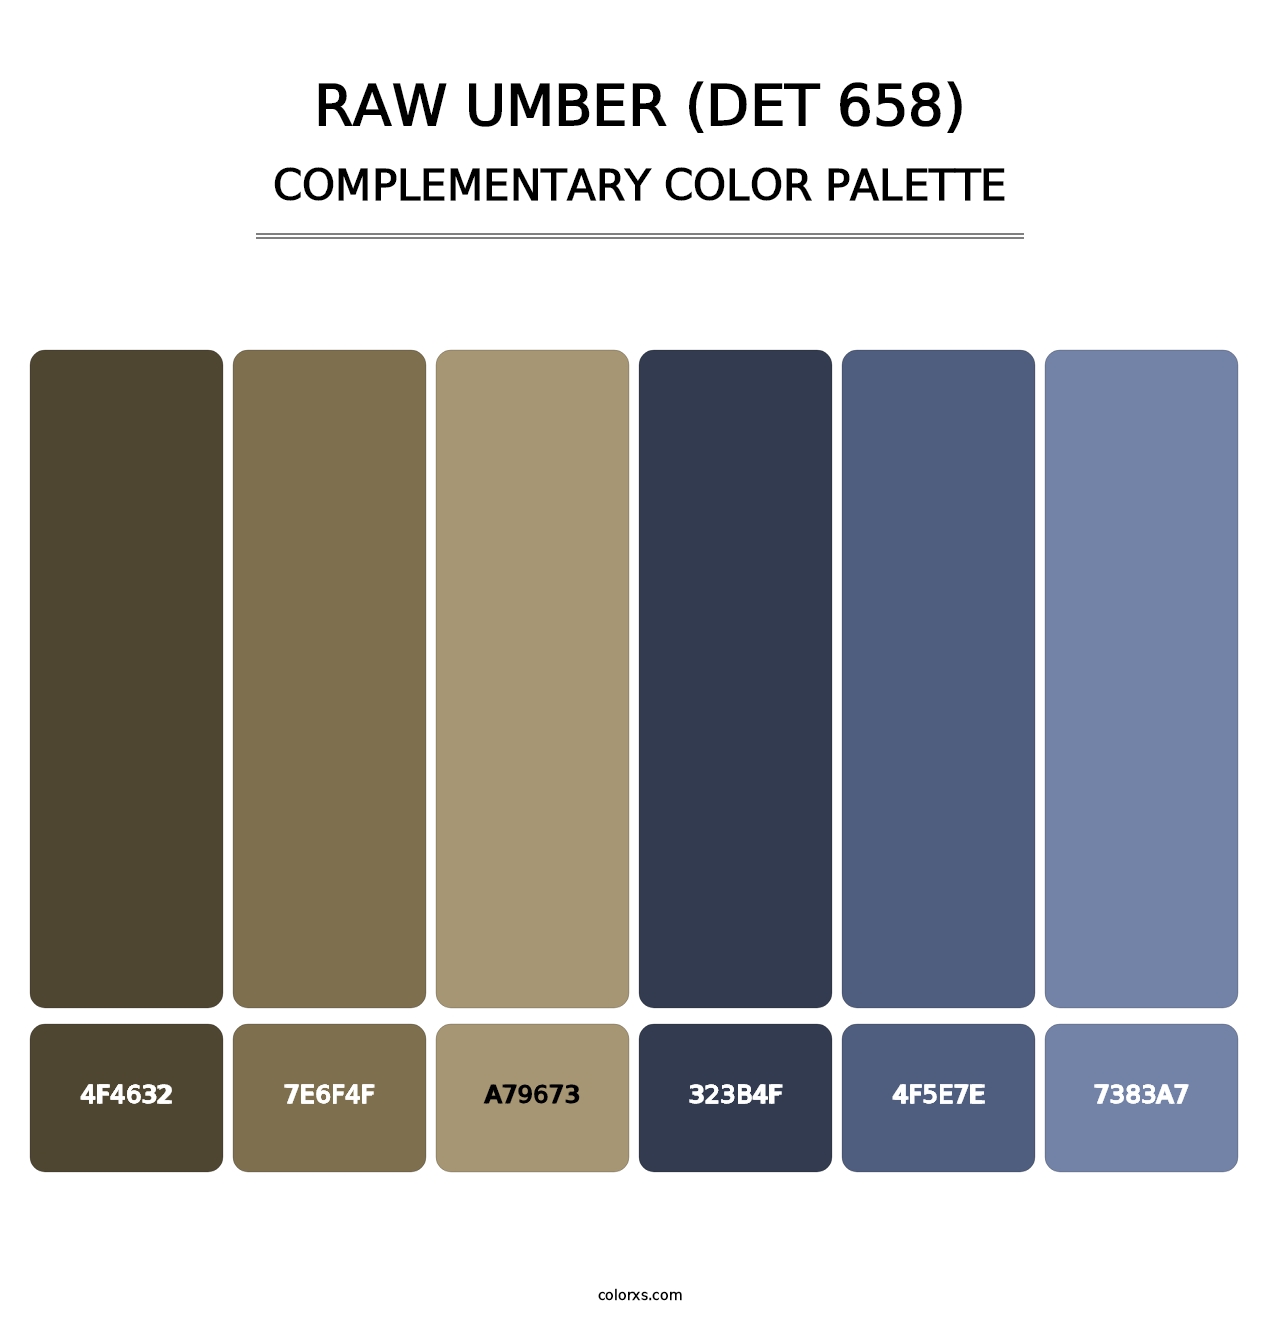 Raw Umber (DET 658) - Complementary Color Palette